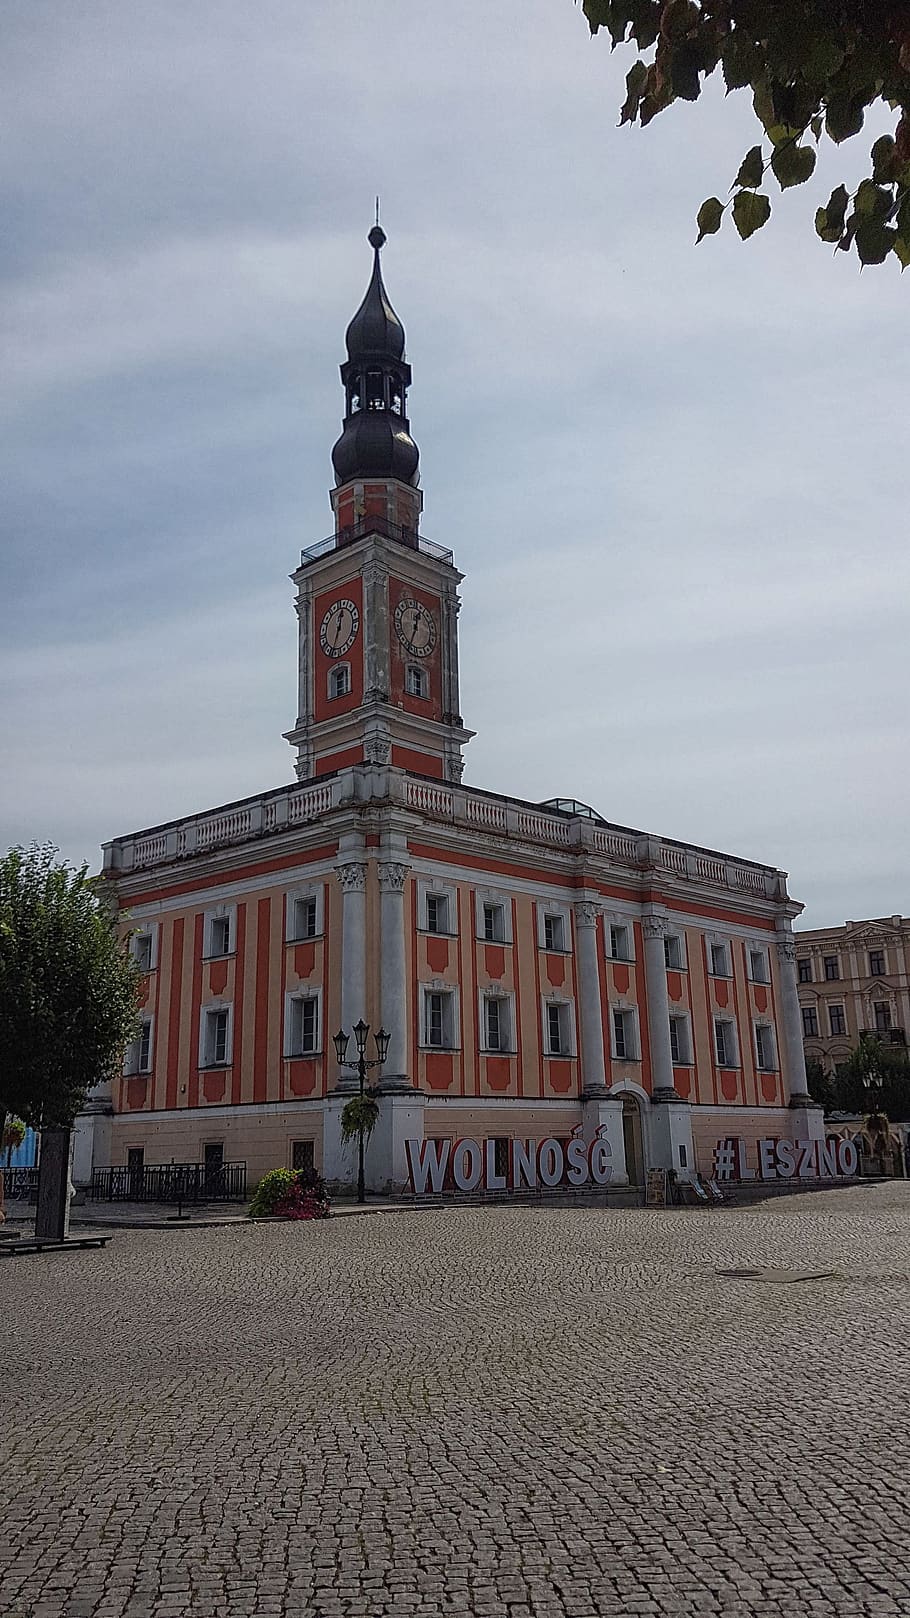 the town hall, city, the market, architecture, monument, tower, history, townhouses, monuments, poland